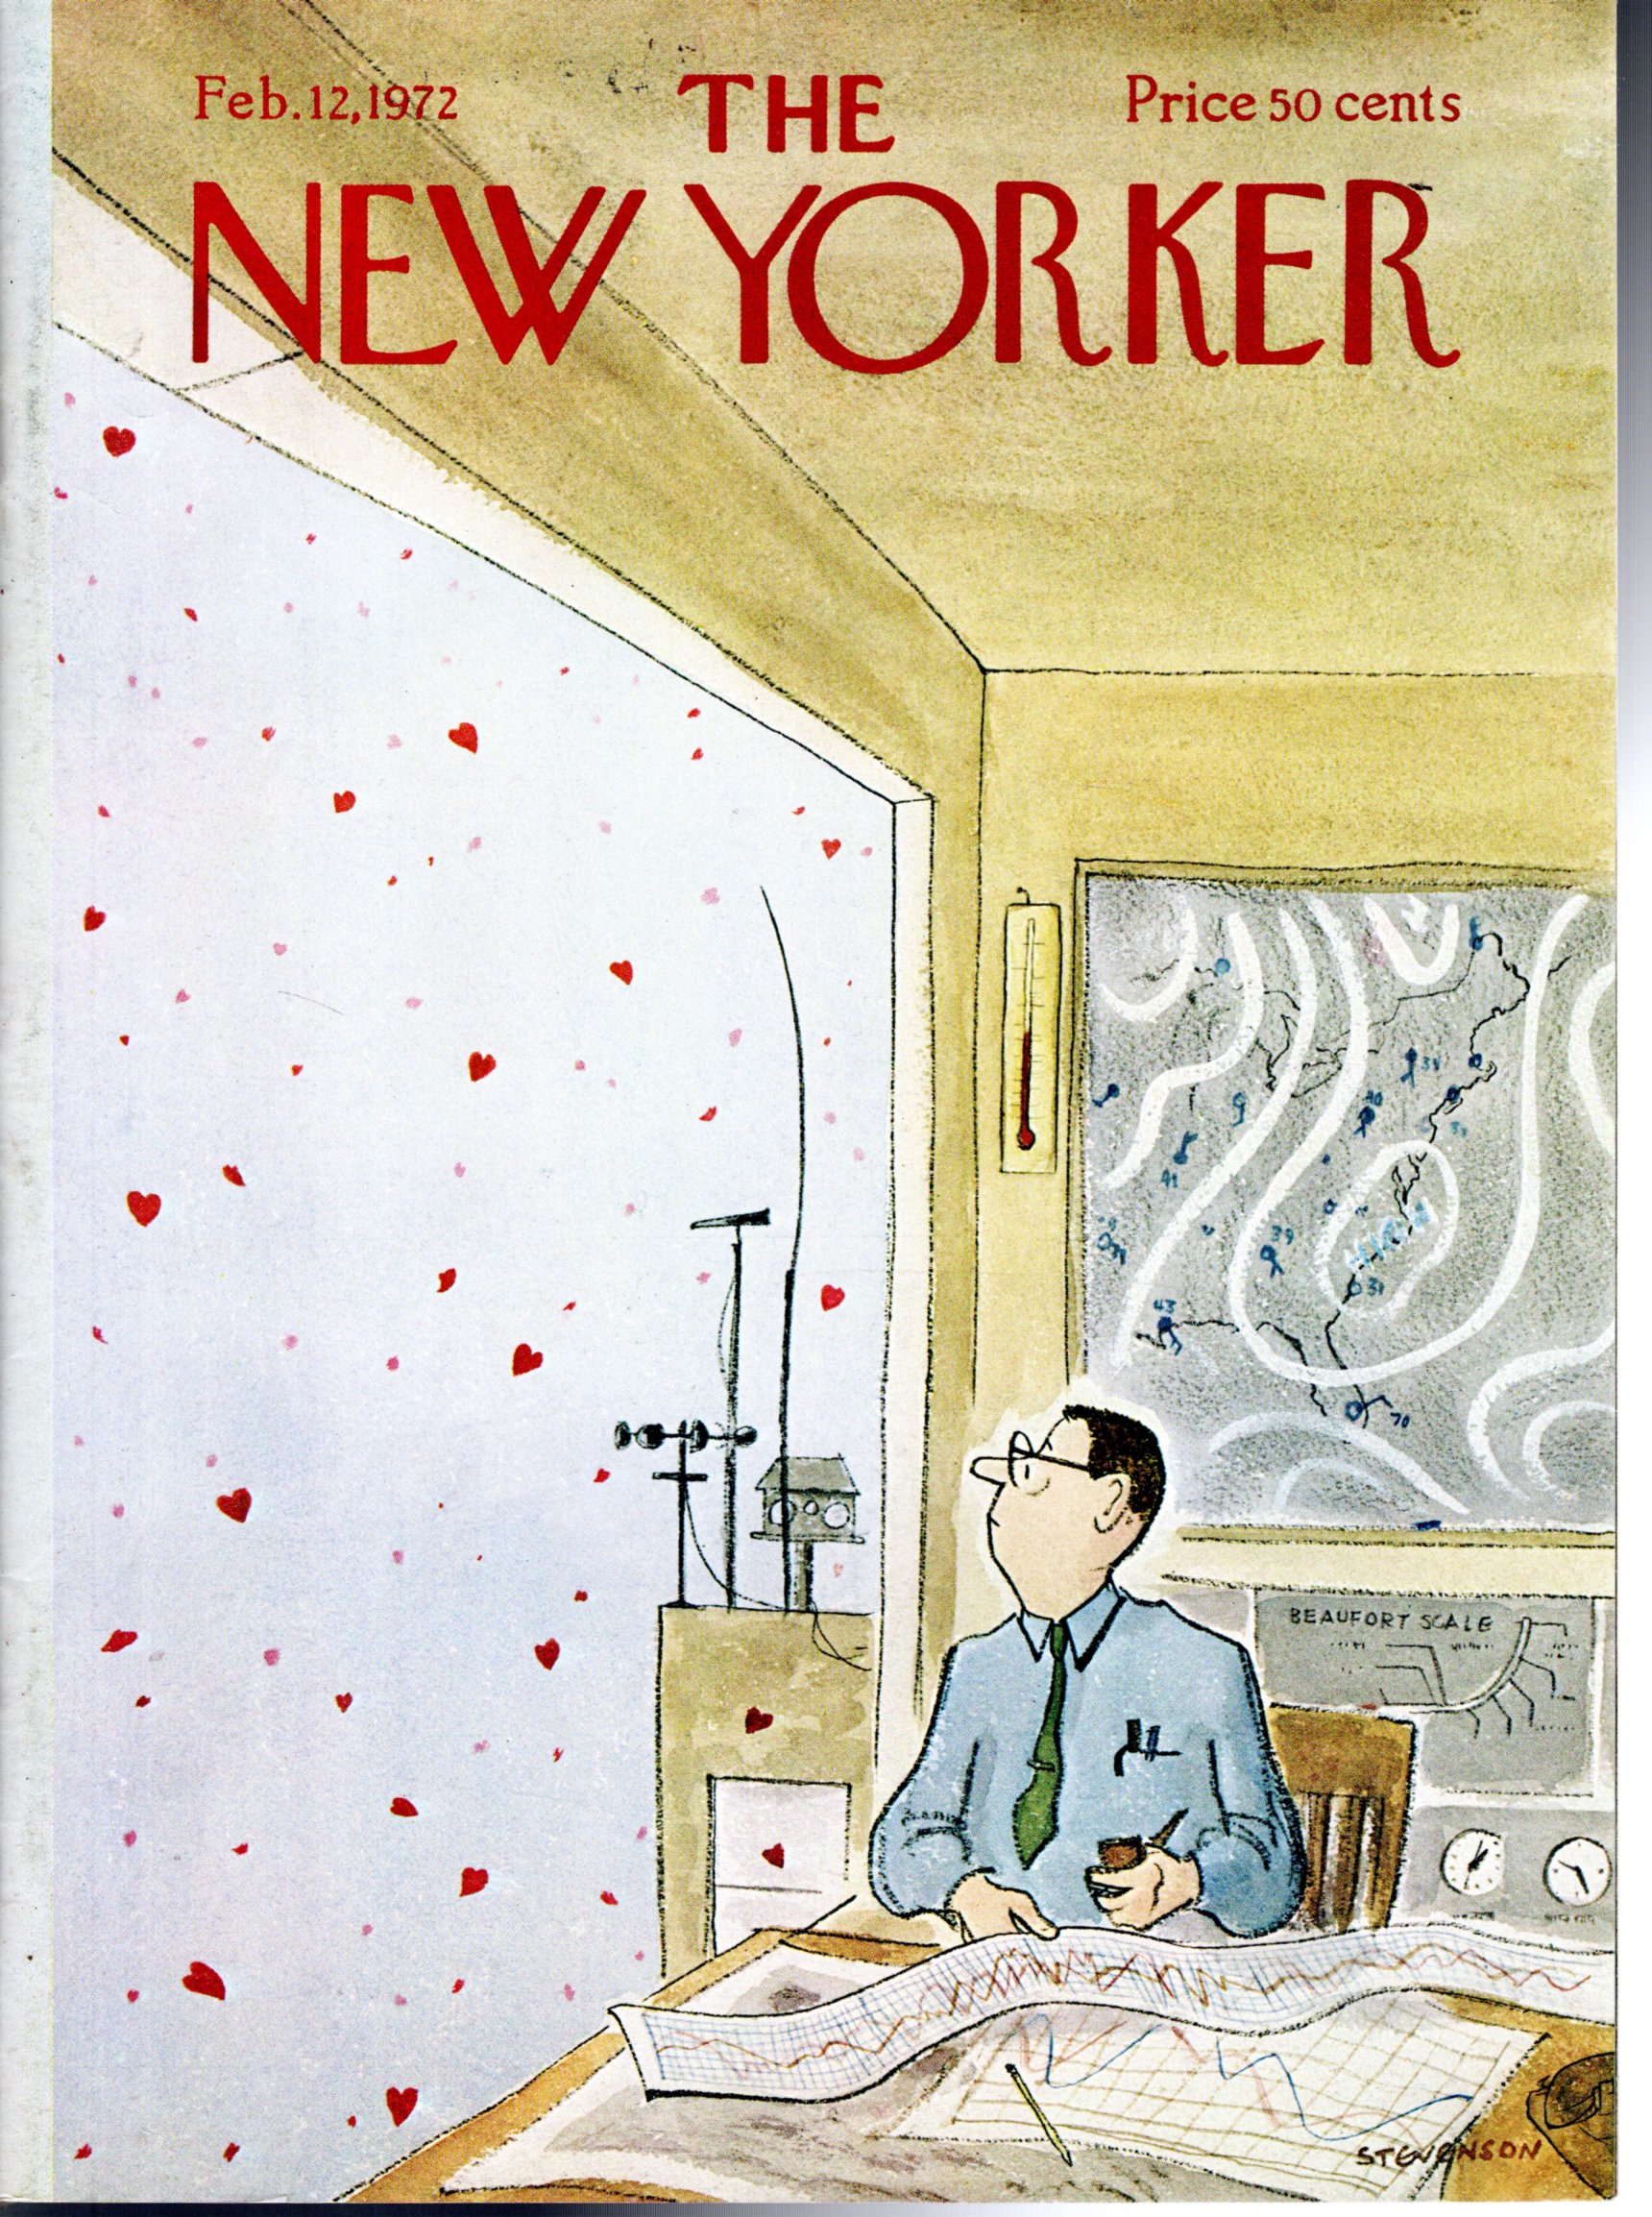 The New Yorker (Magazine) February 12, 1972 by Shawn, William (editor ...